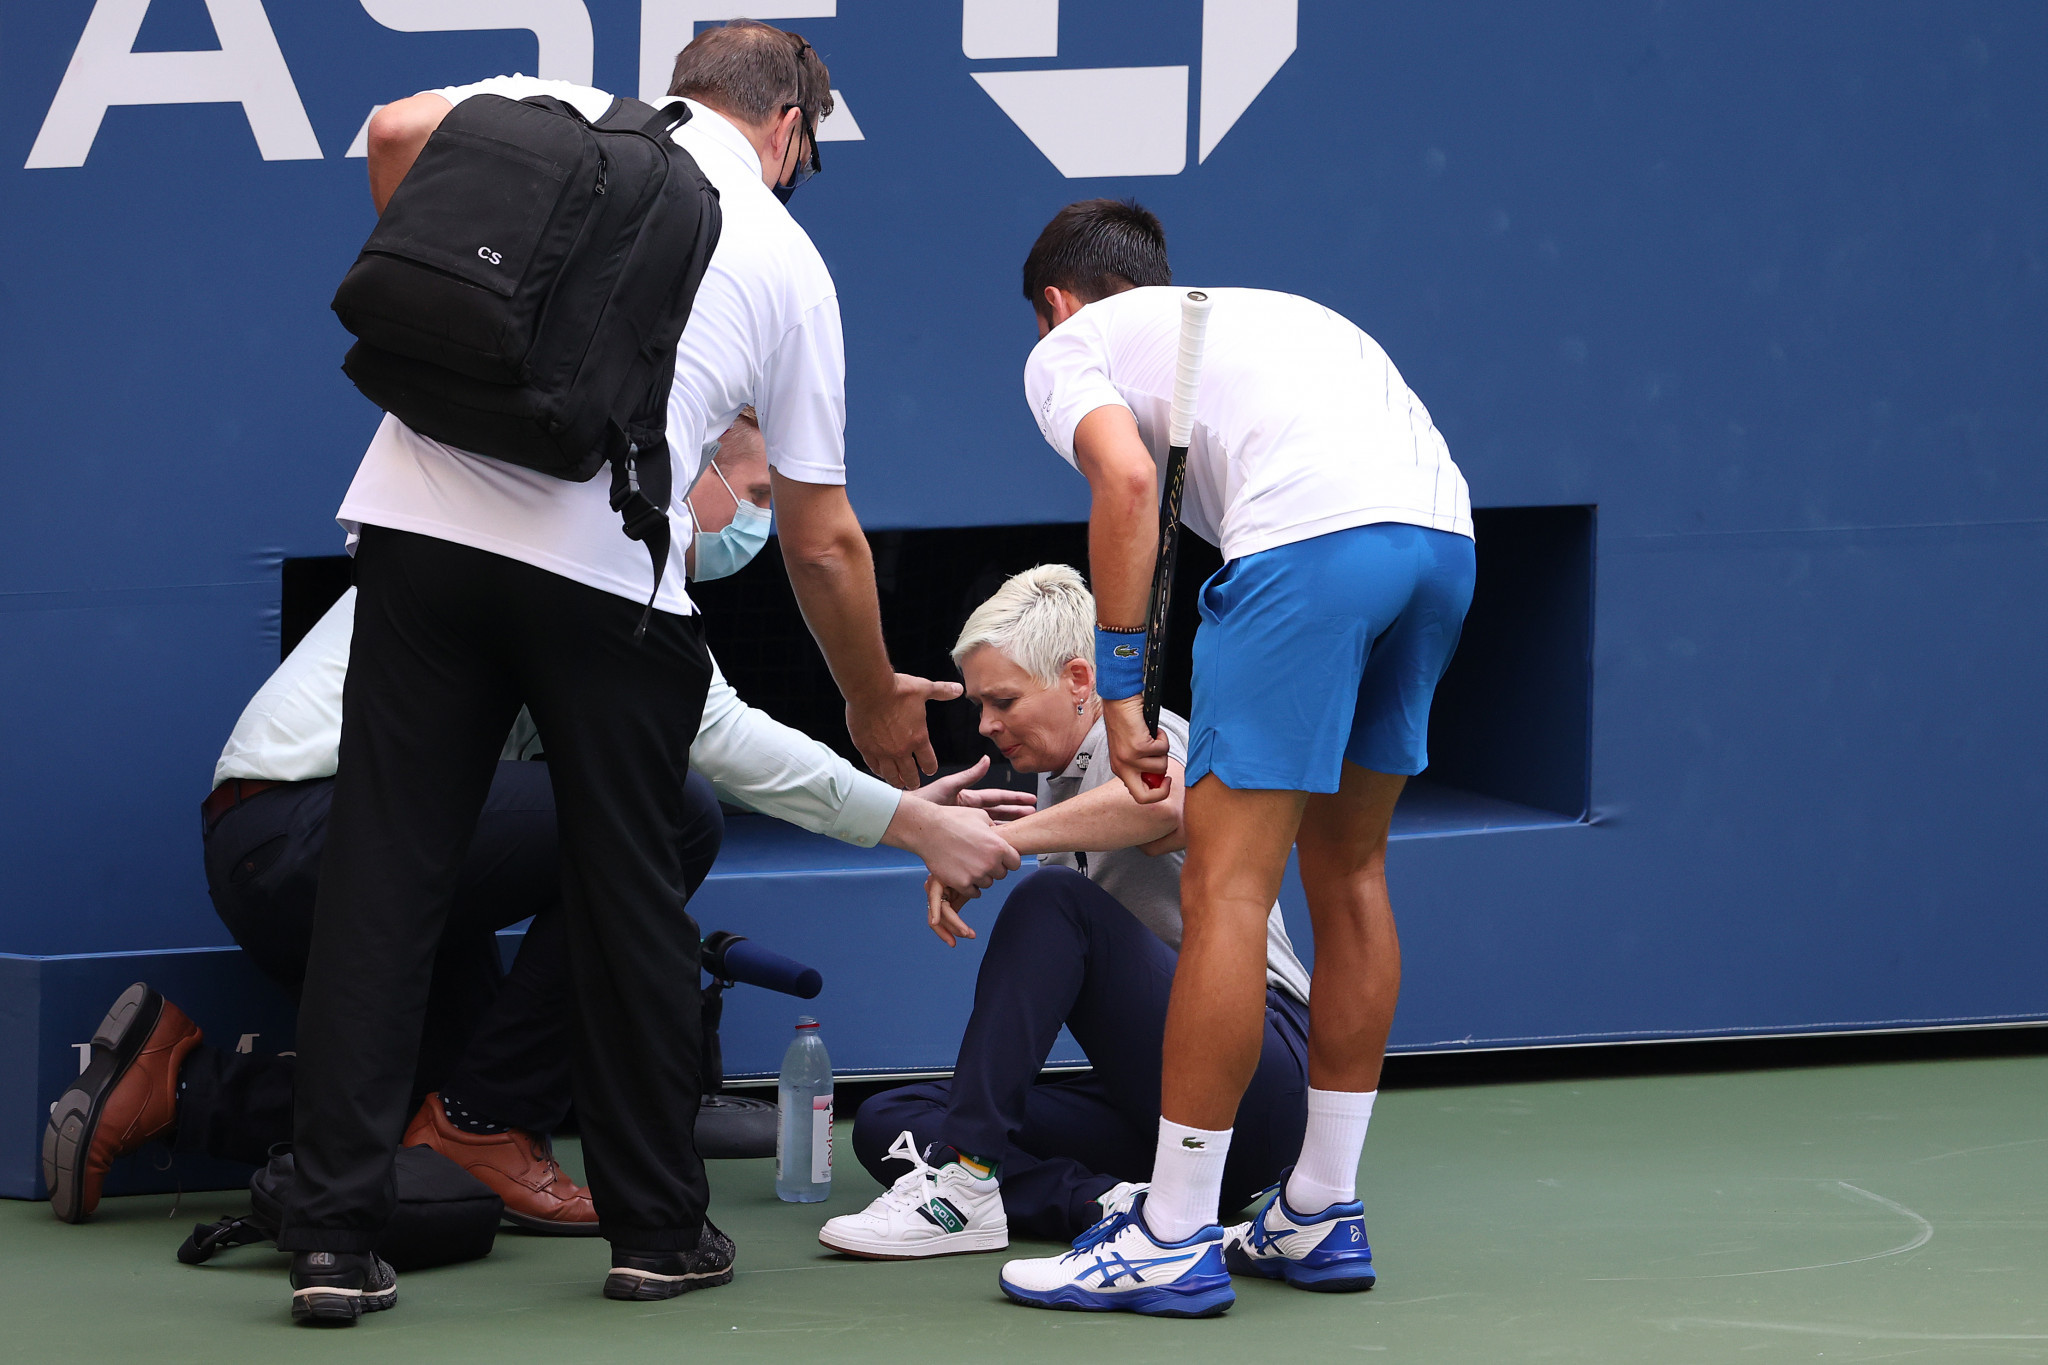 Djokovic disqualified from US Open after hitting line judge with ball